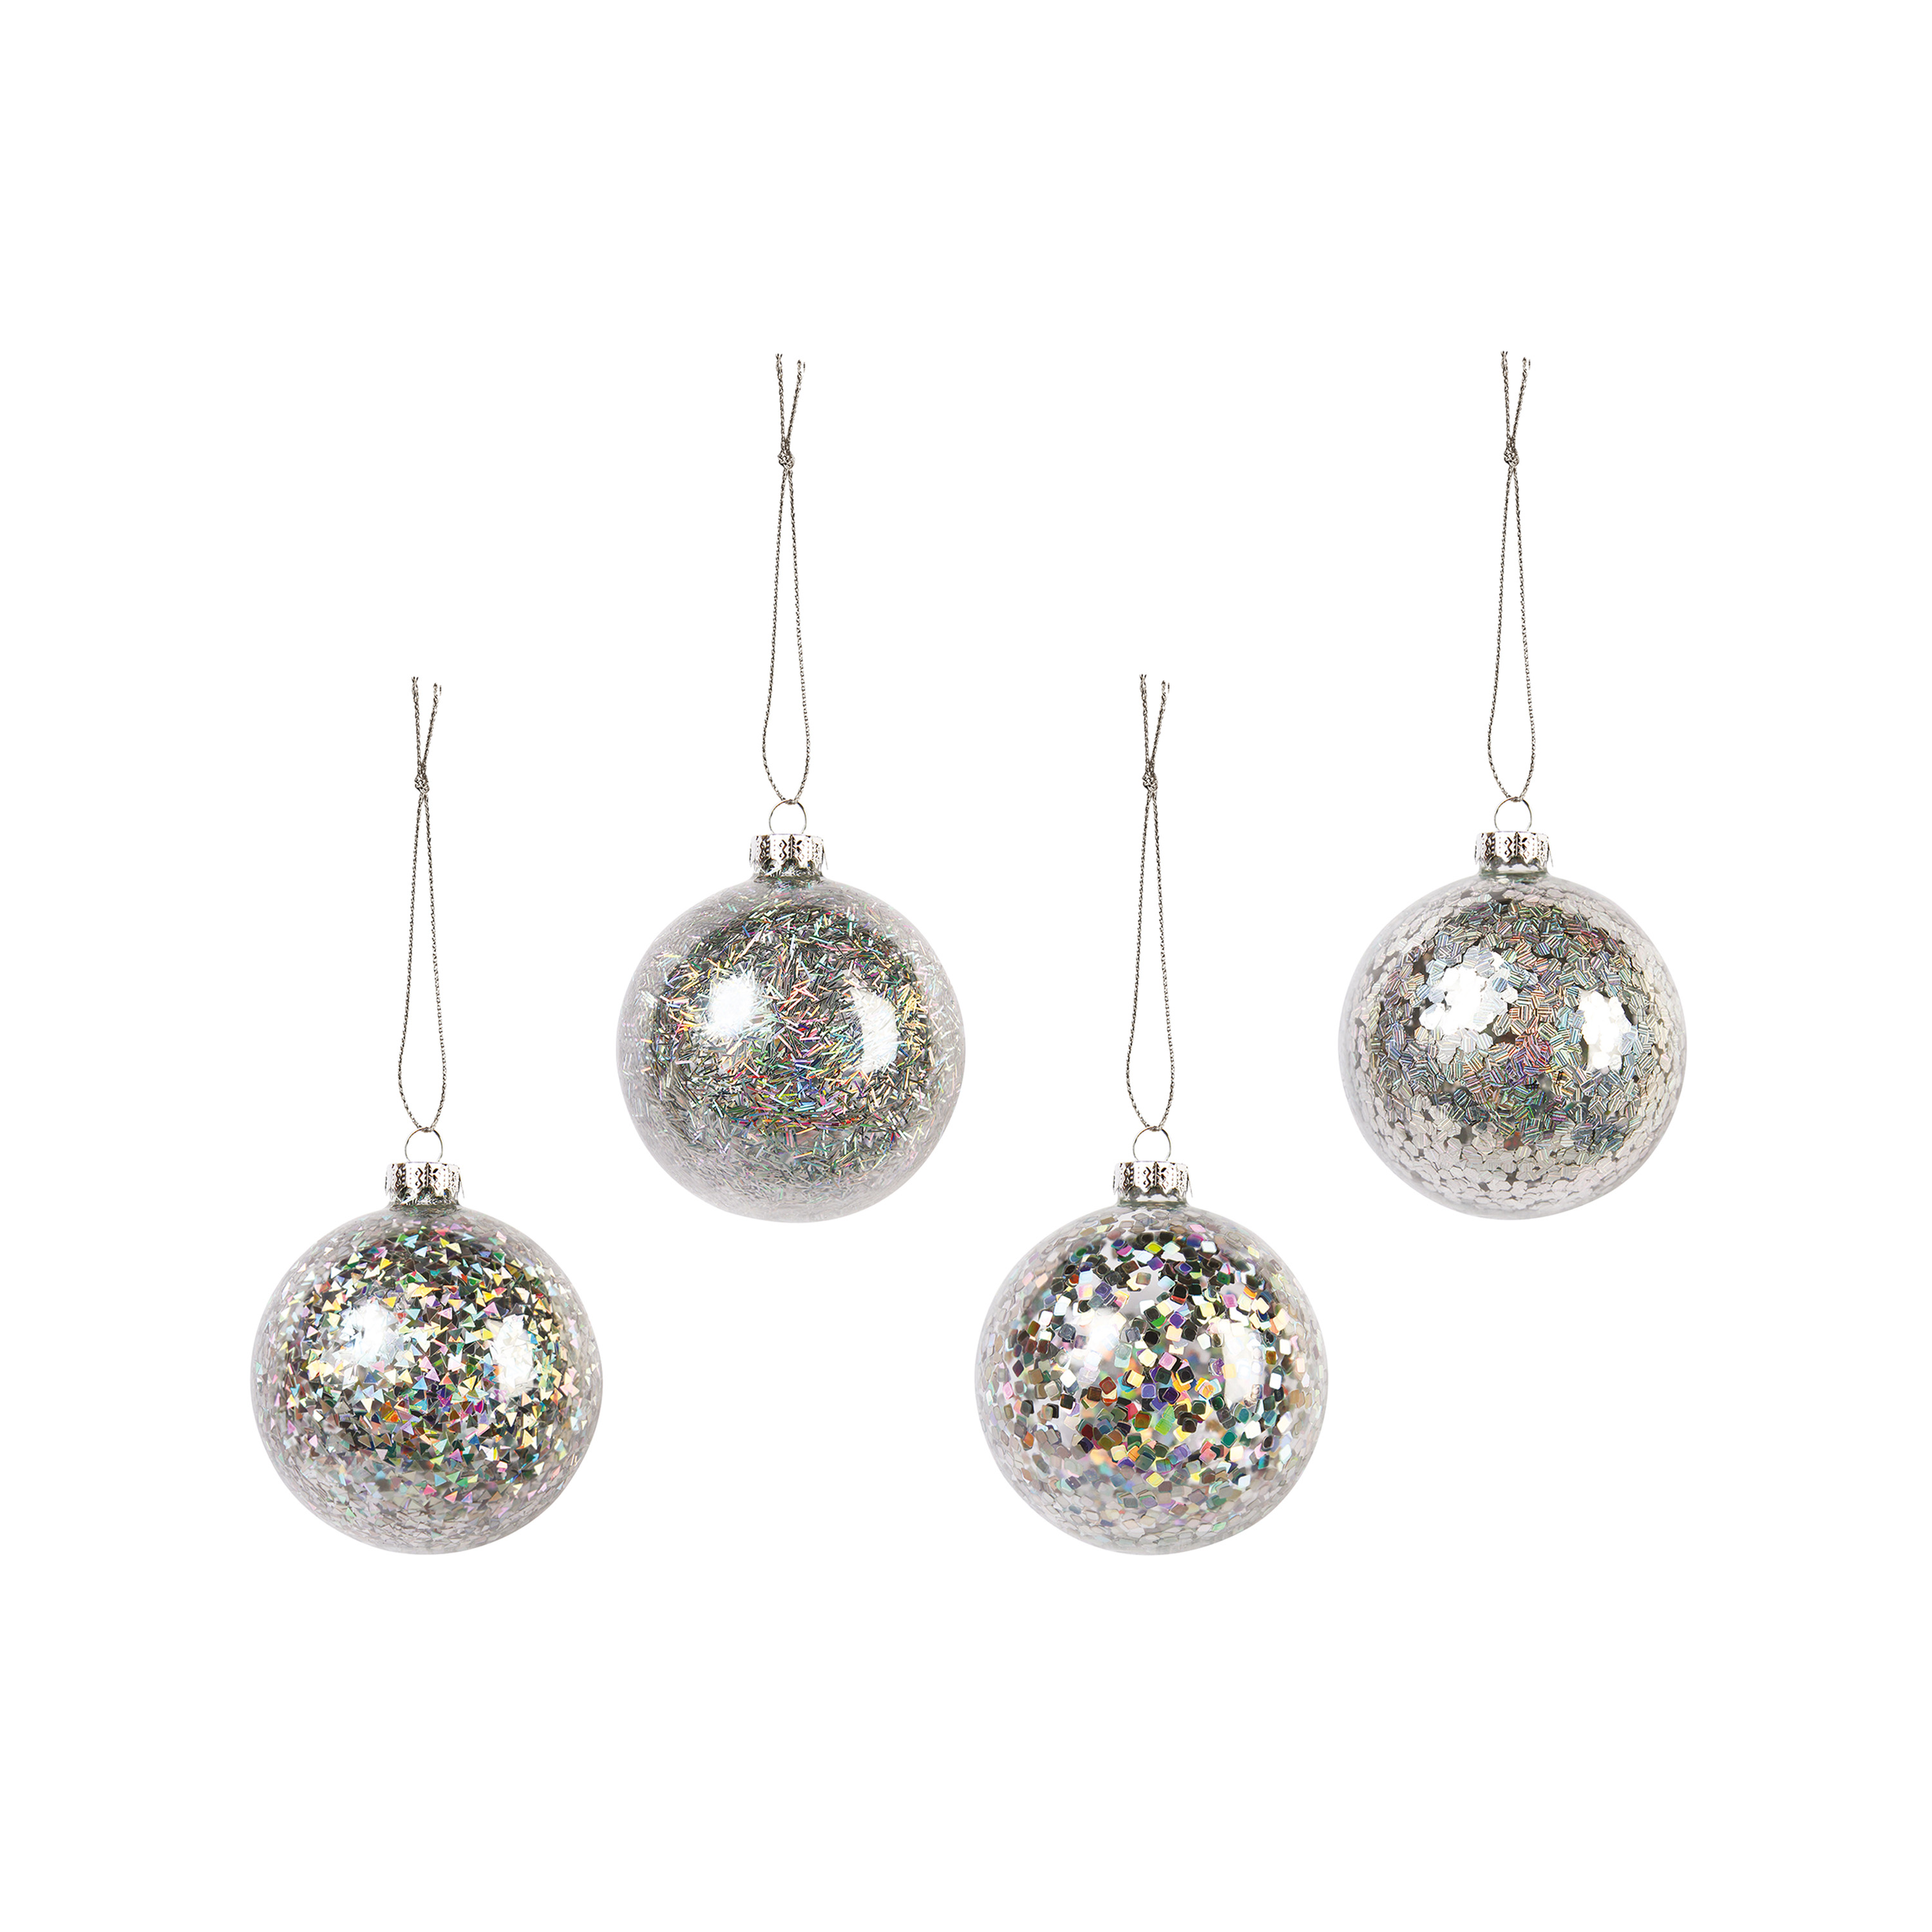 &klevering Set of 4 Hanging Christmas Holographic Ornaments